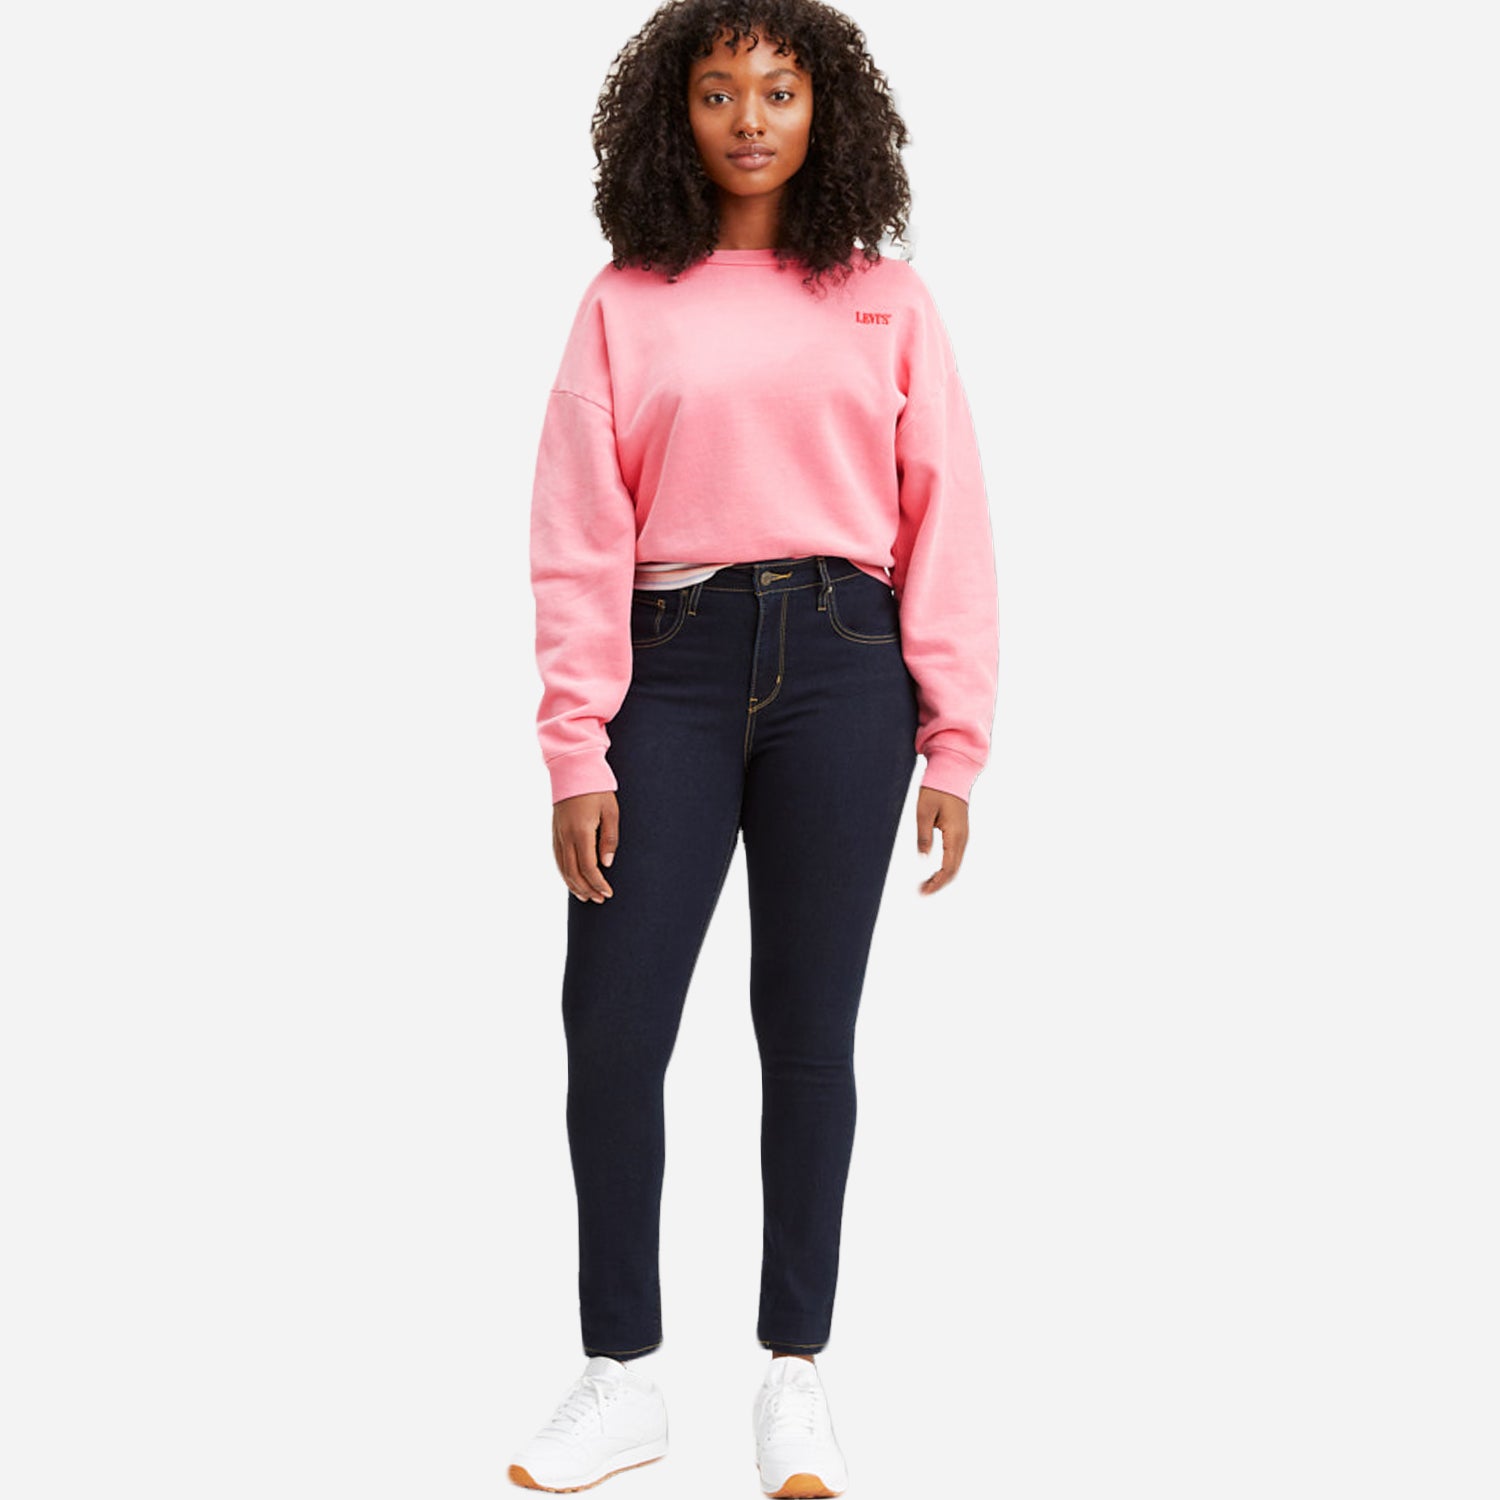 Shop for levis high rise skinny jeans Online | The SM Store